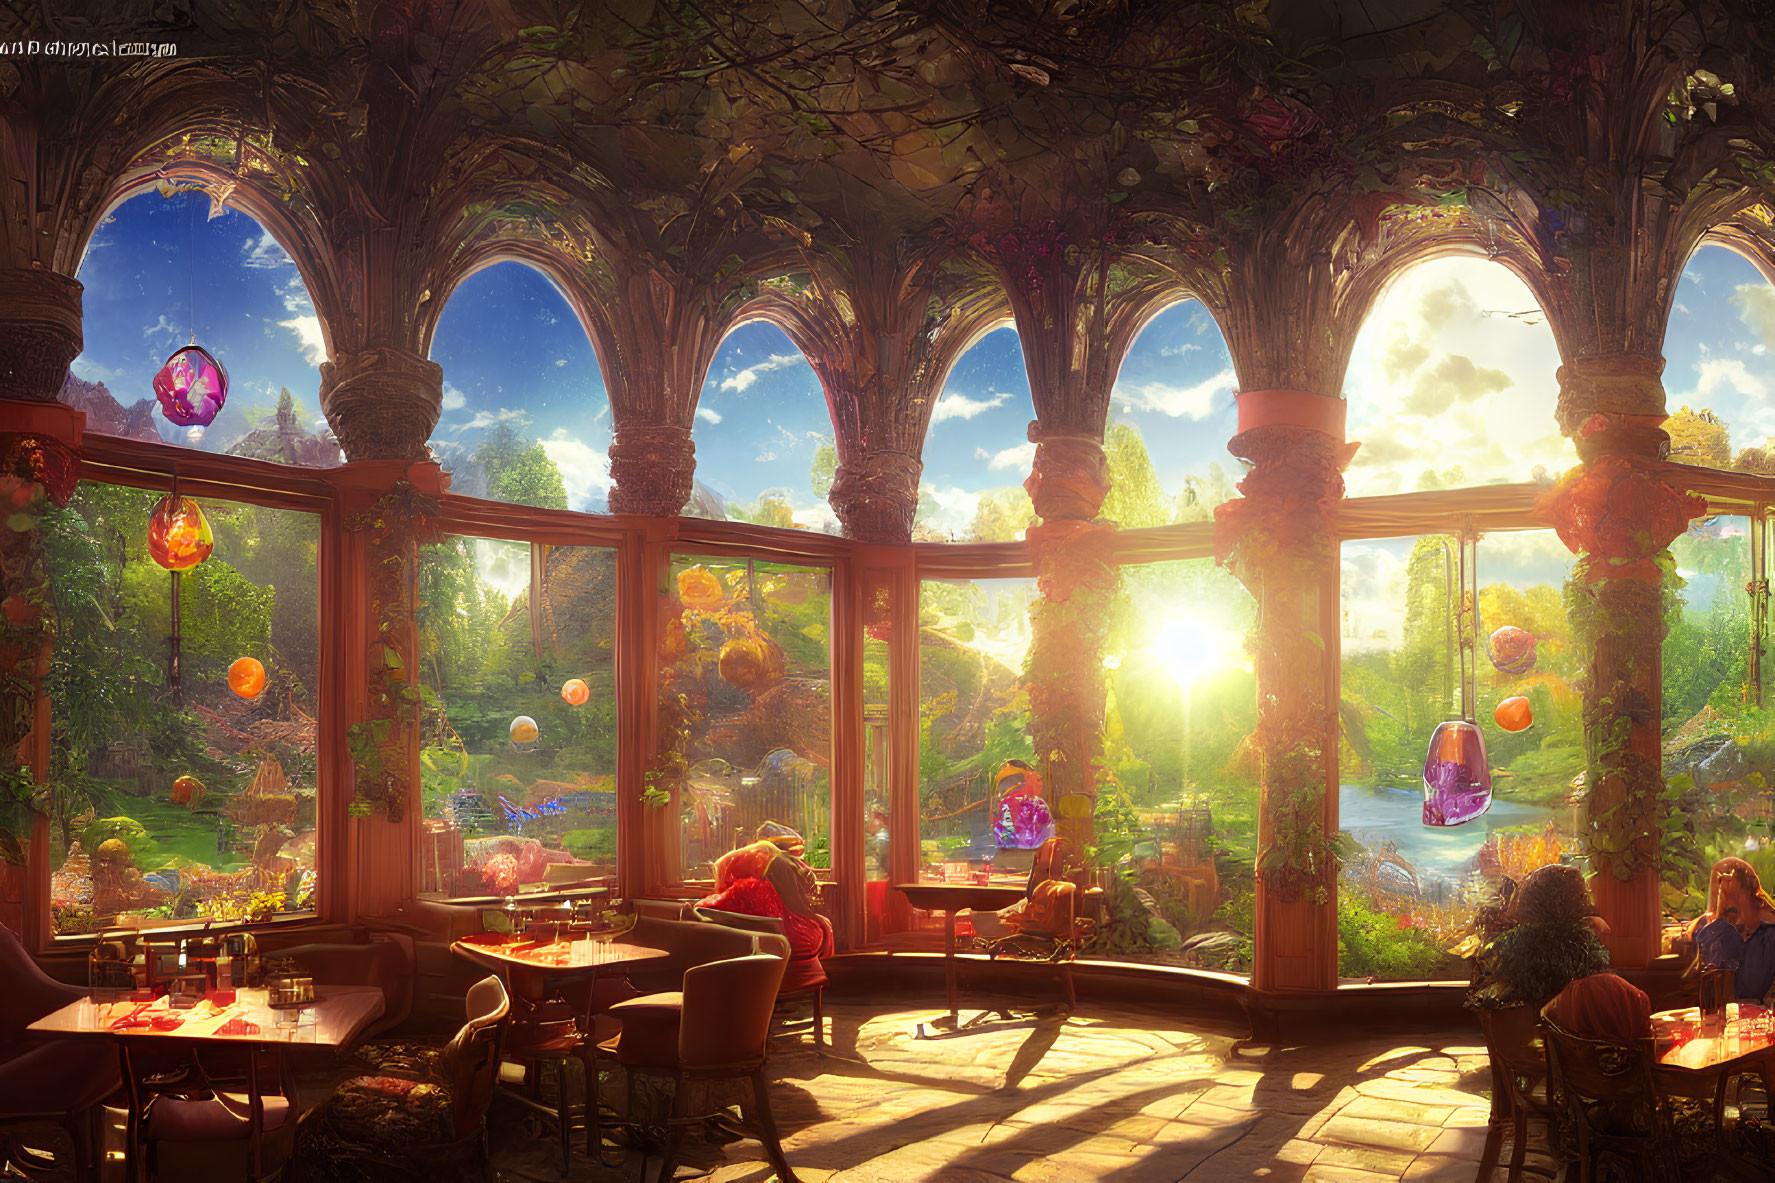 Cafe with Large Windows, Arches, and Floating Light Orbs